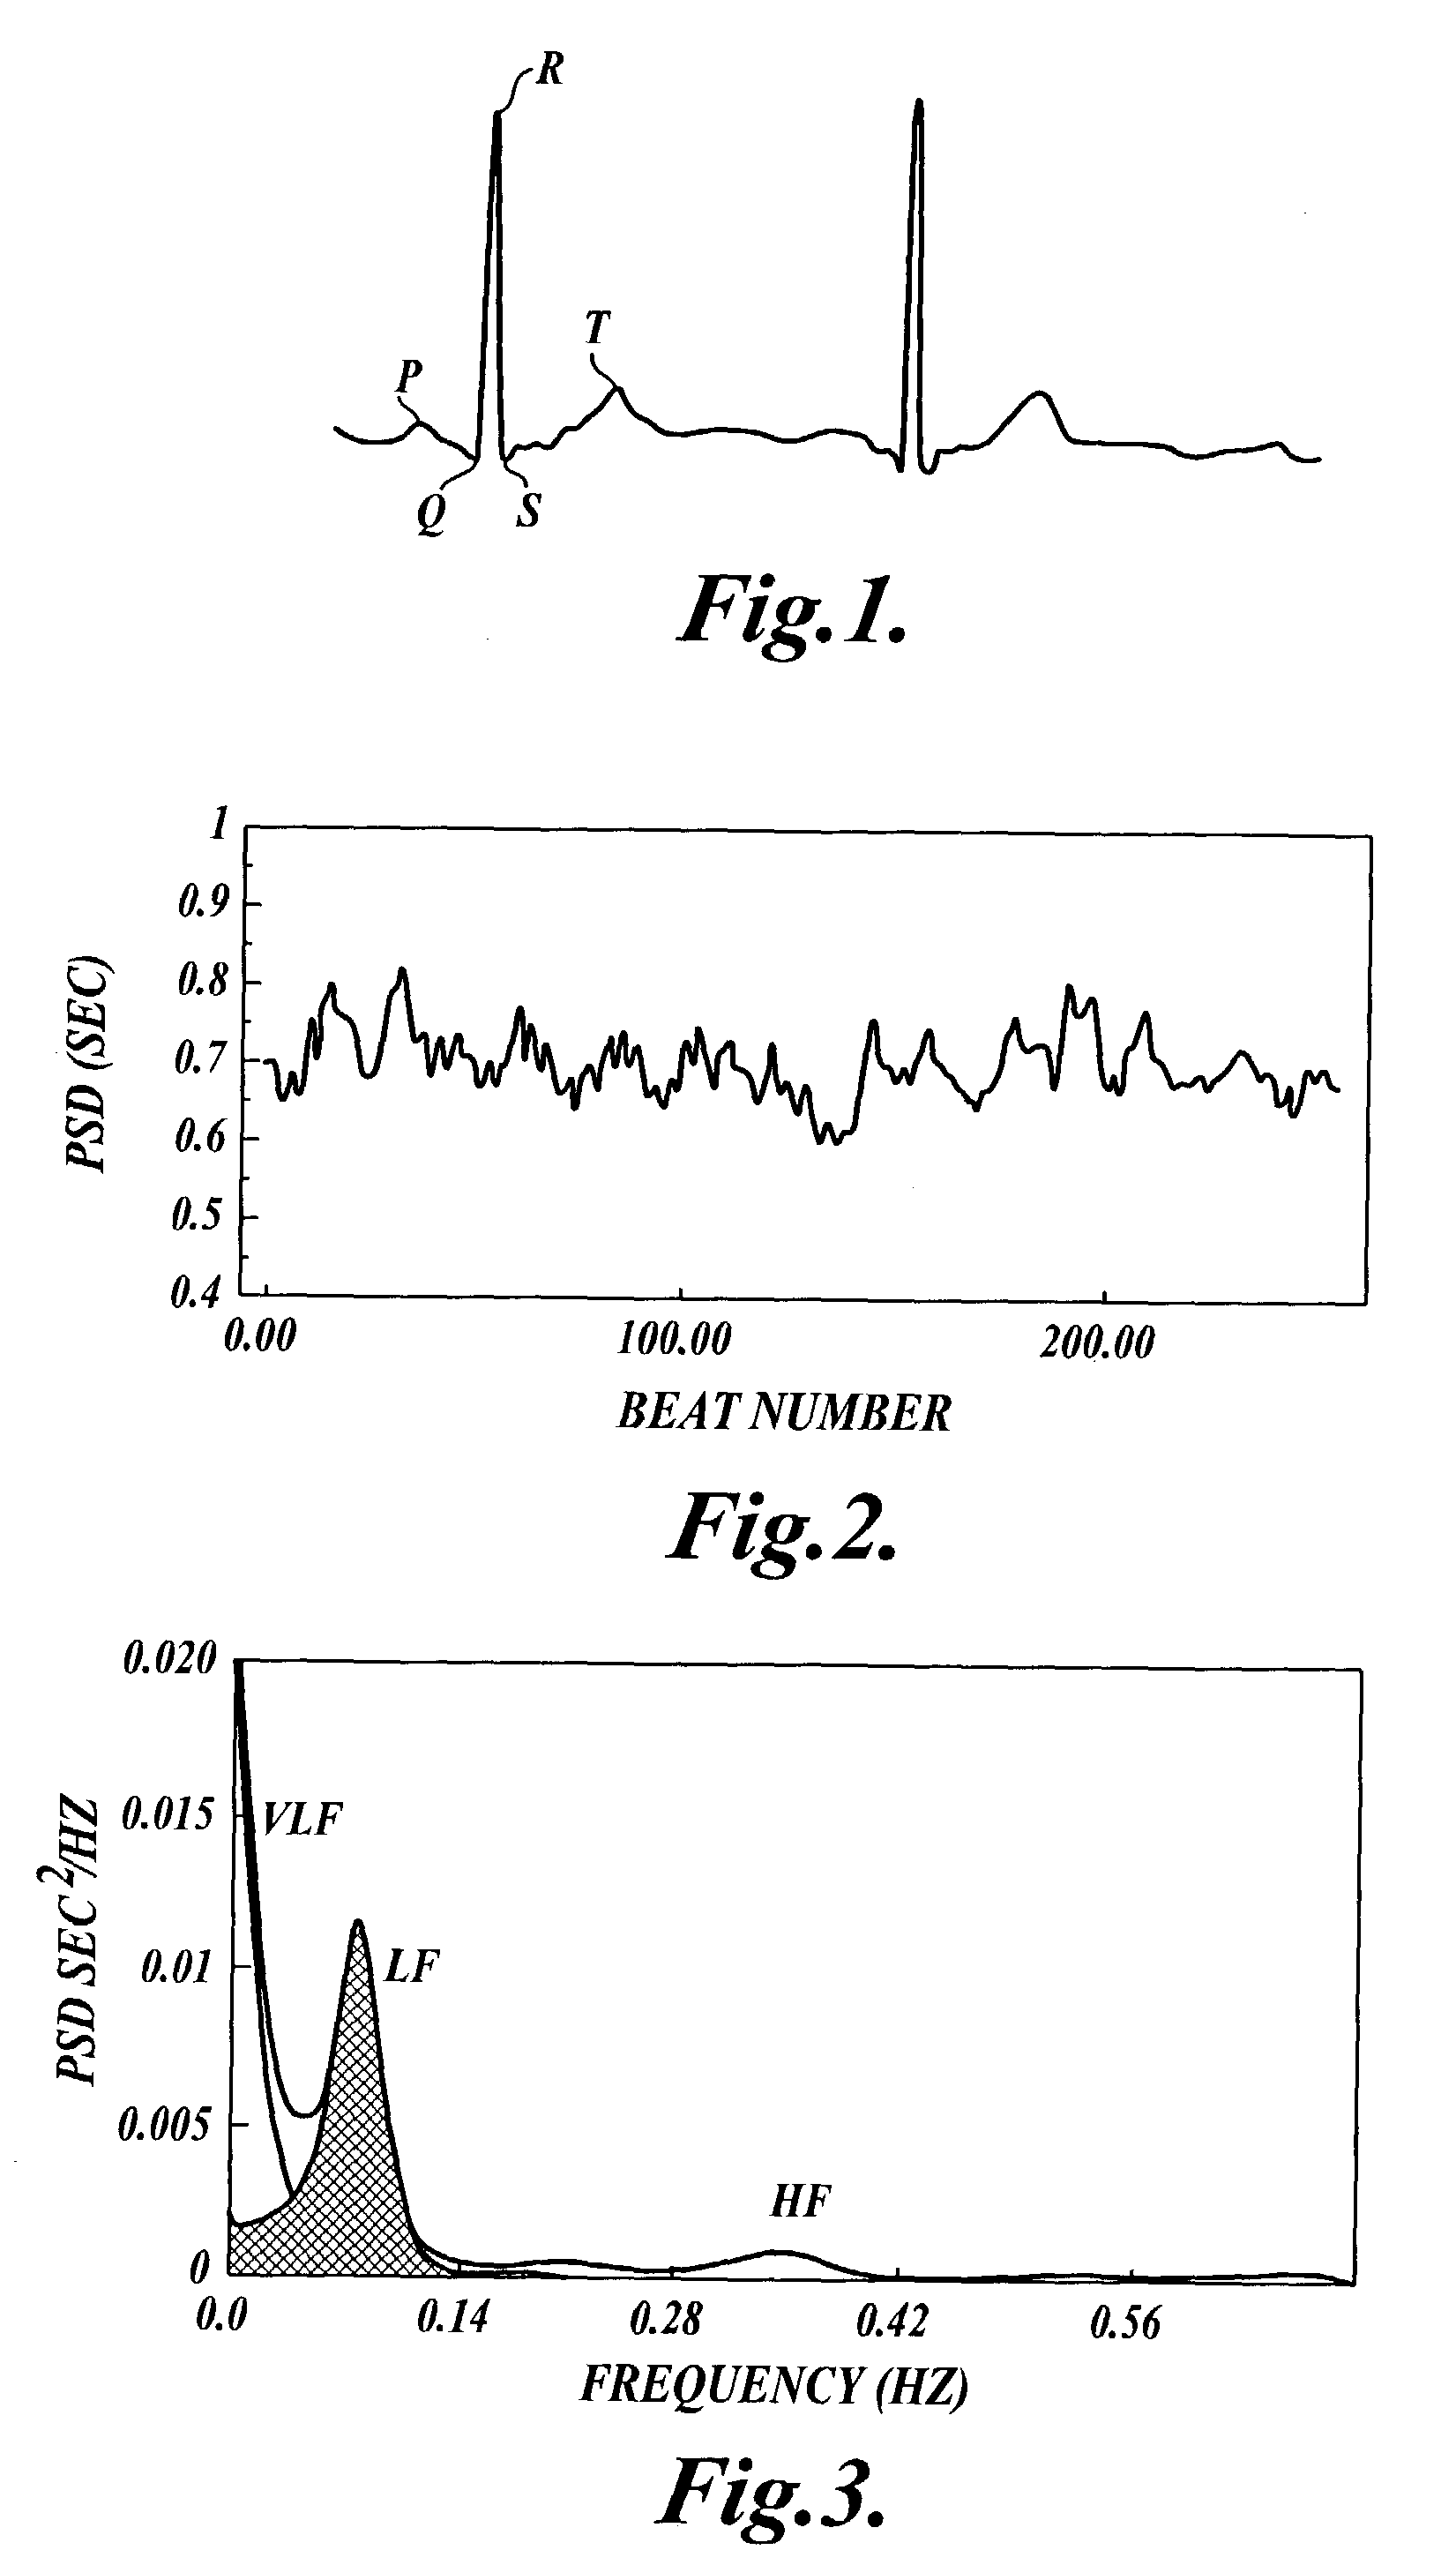 Methods for determining whether to provide an inhibitor of sympathetic nervous system activity to a human being suffering from an autoimmune disease or fibryomyalgia